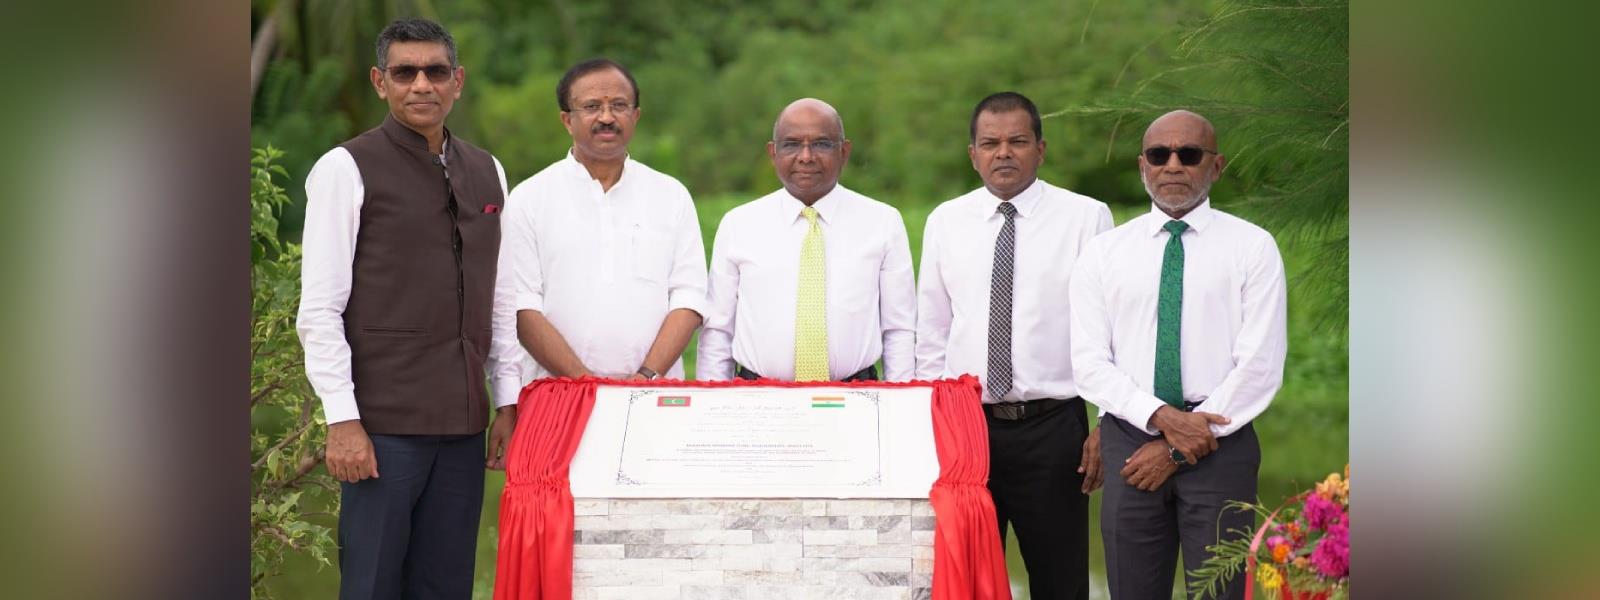 Minister of State for External Affairs Shri V. Muraleedharan along with H.E Mr. Abdulla Shahid, Foreign Minister of Maldives inaugurated Hulhudhoo eco-tourism zone in Addu City in Maldives